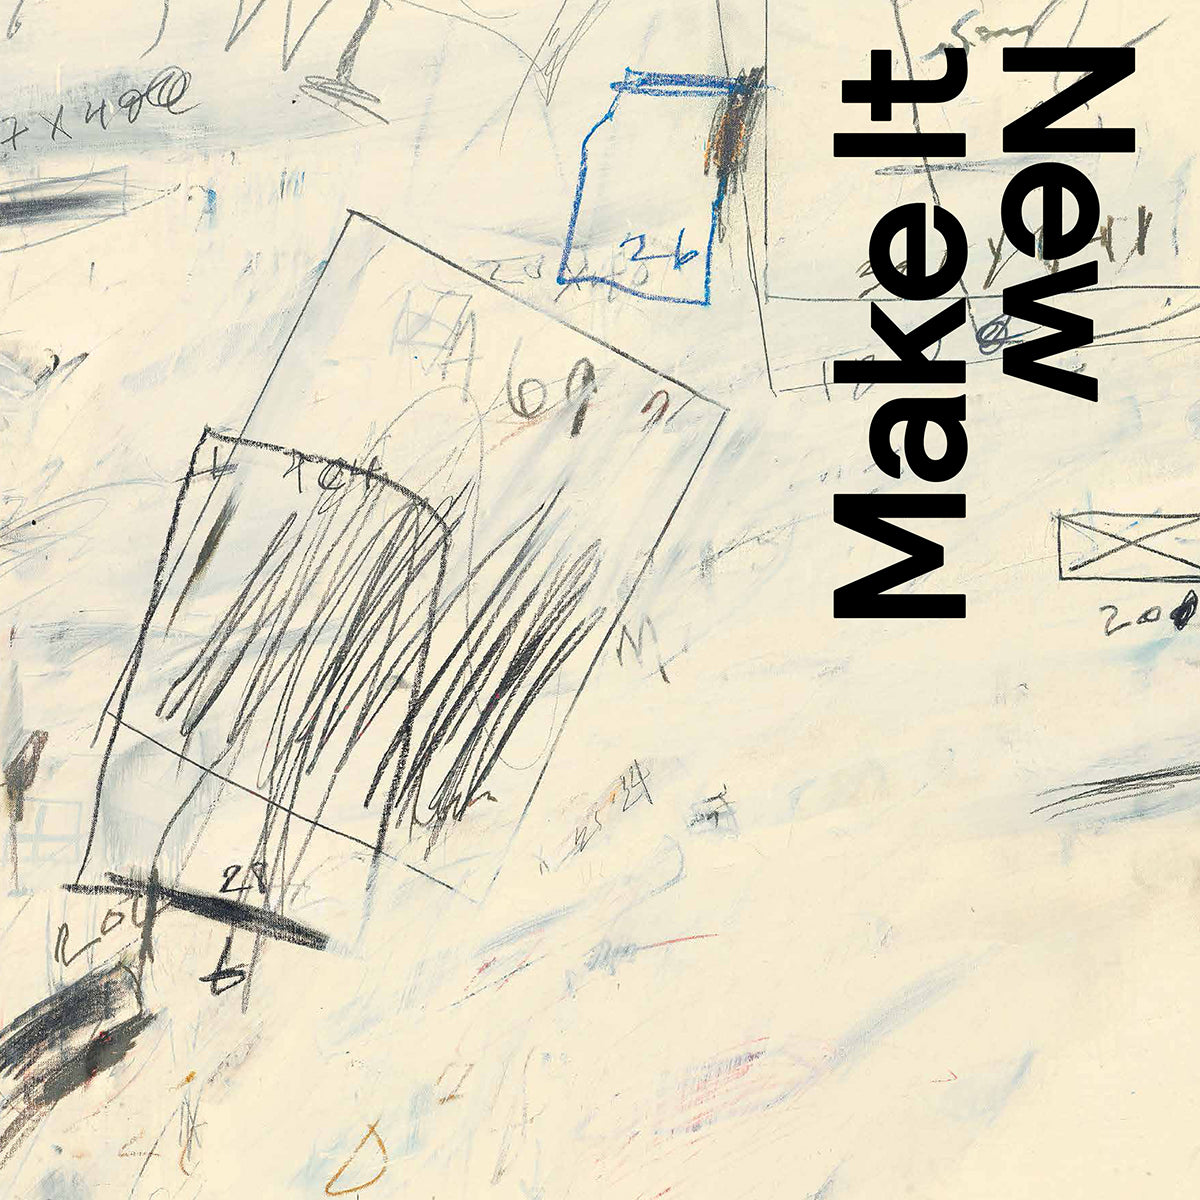 Make it New: Abstract Painting from the National Gallery of Art 1950–1975